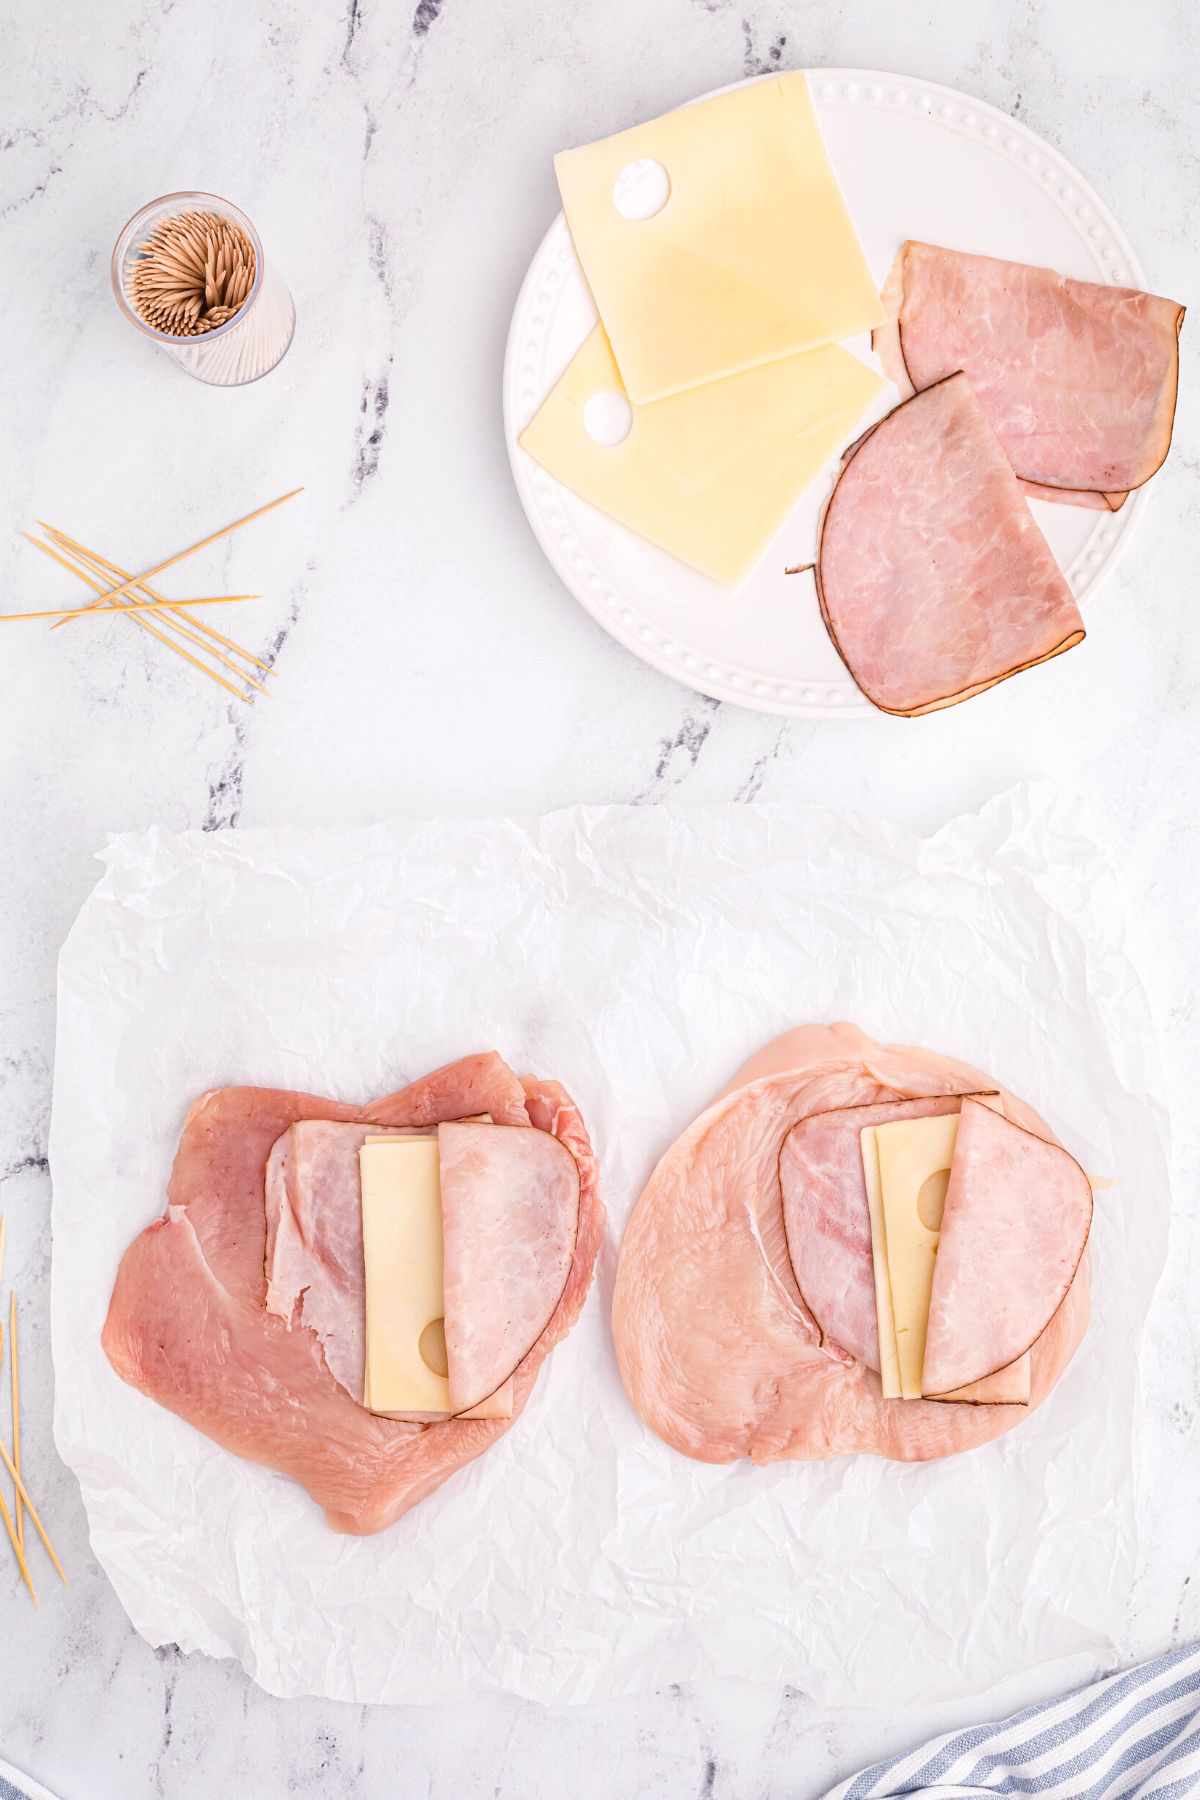 Uncooked chicken breasts sliced open and flattened, then filled with ham and cheese slices